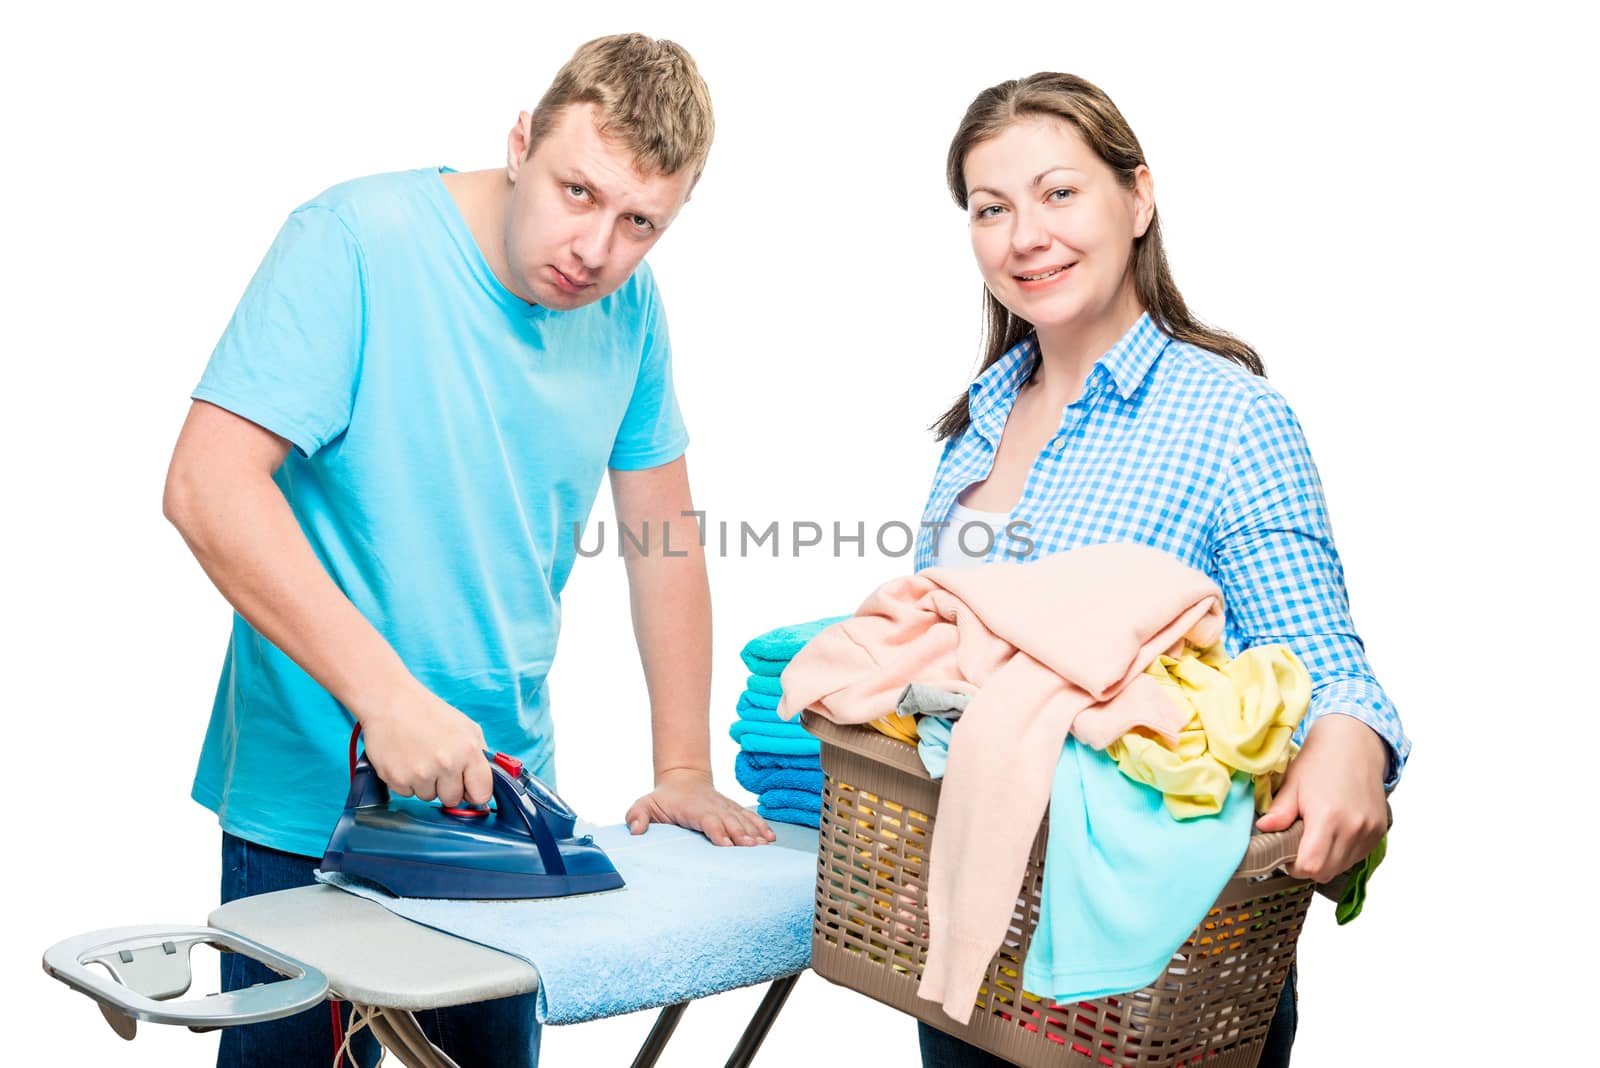 homework, the husband ironing things with an iron on a white bac by kosmsos111